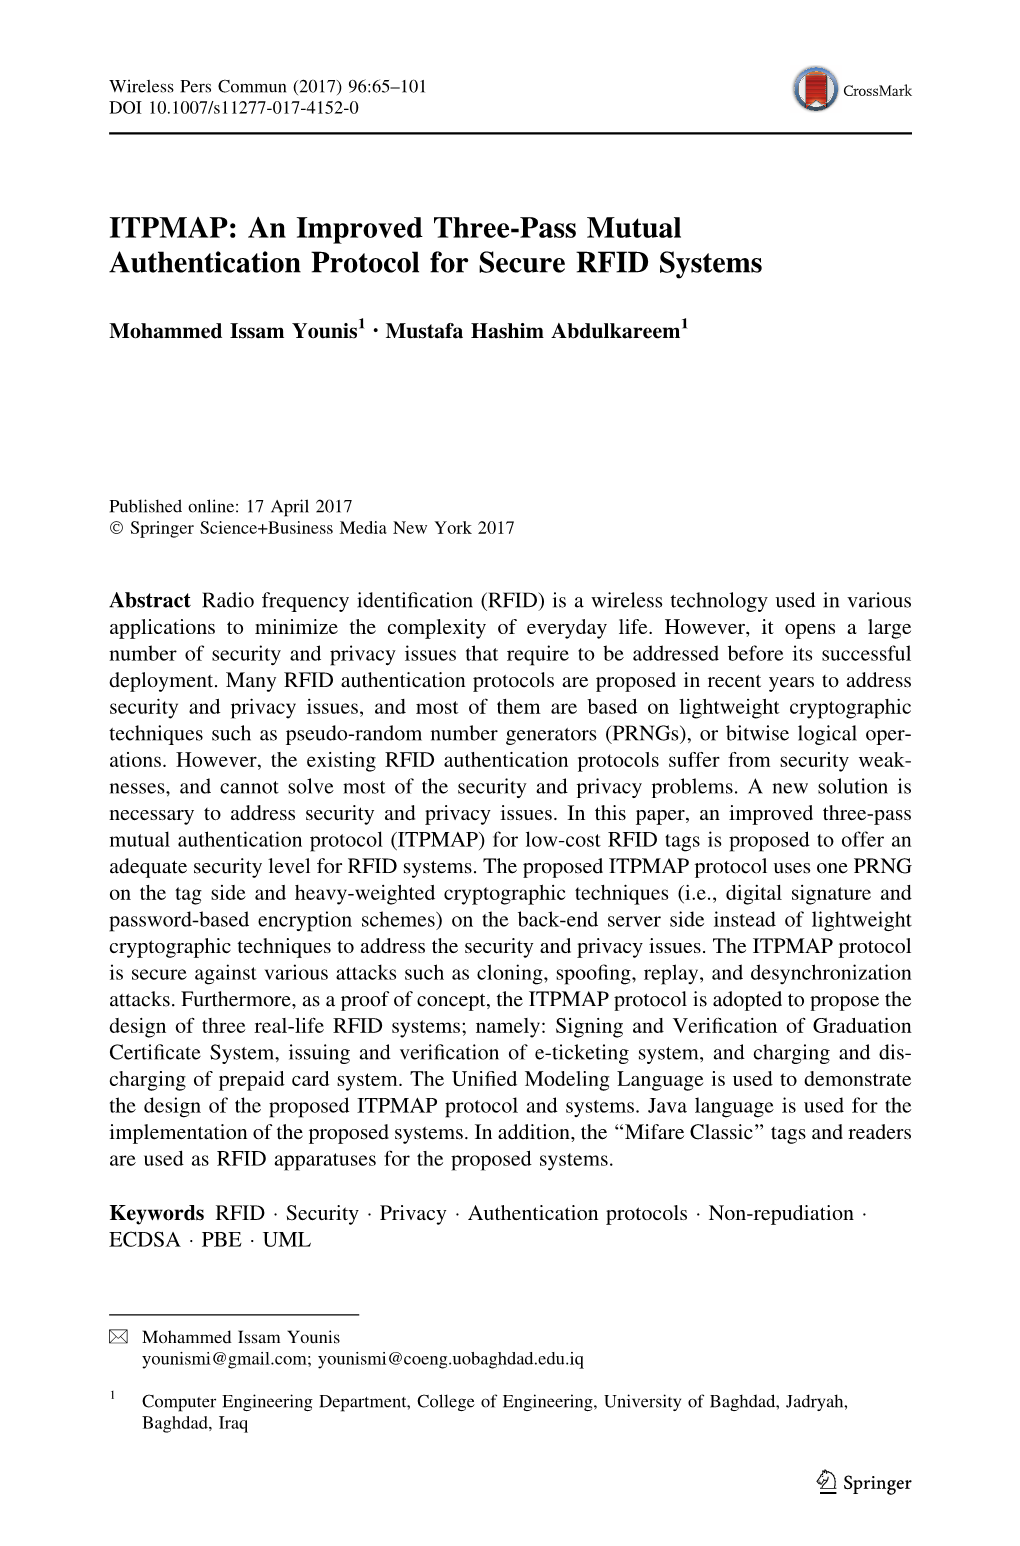 An Improved Three-Pass Mutual Authentication Protocol for Secure RFID Systems